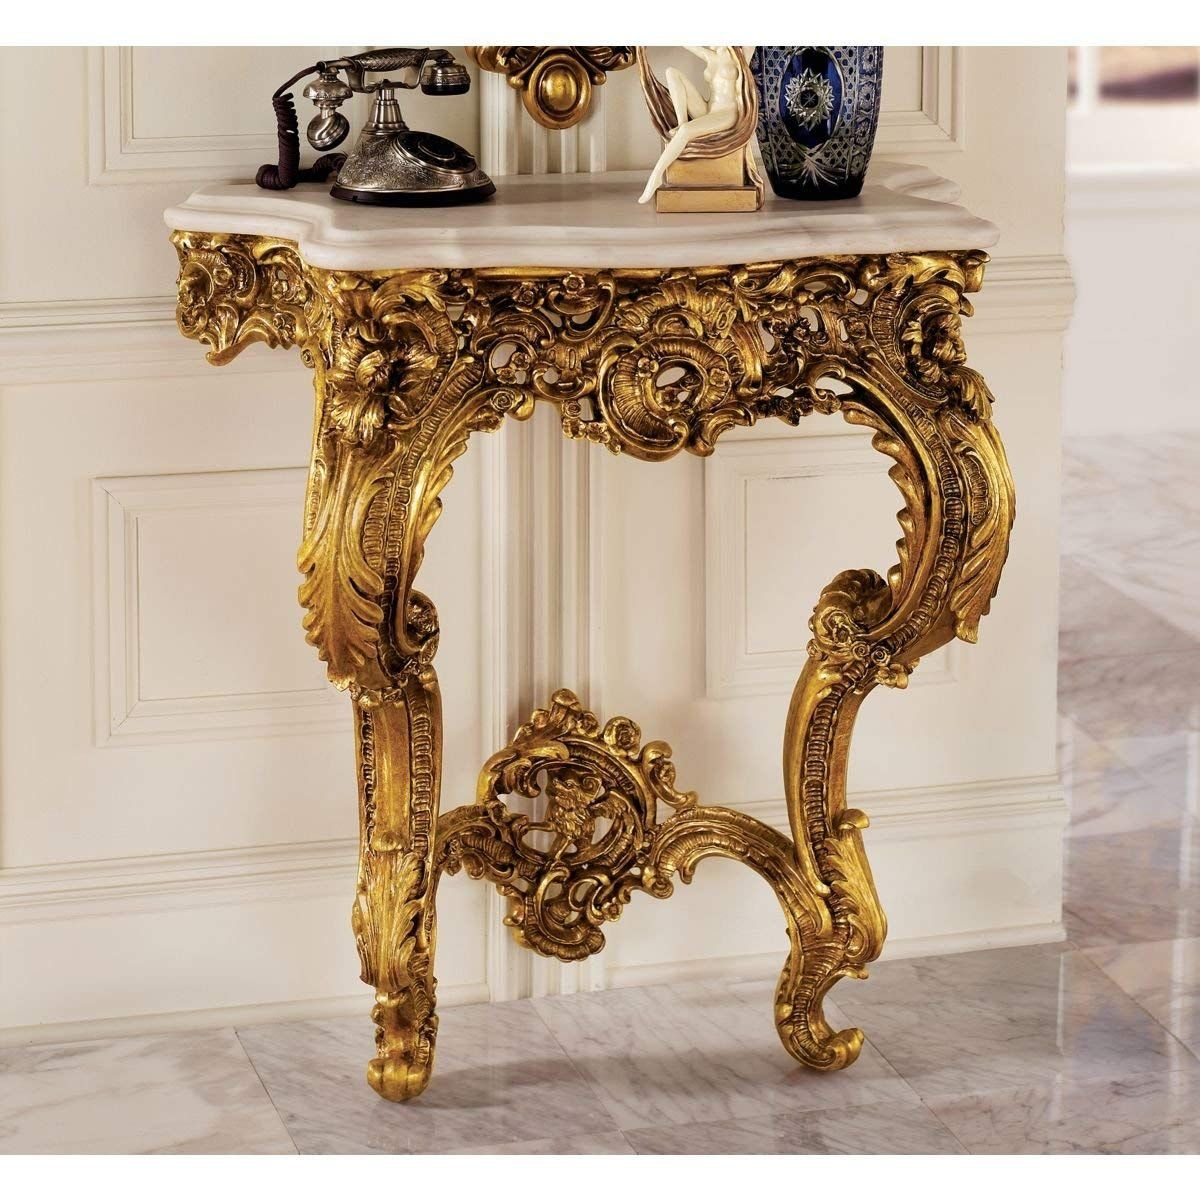 Design Toscano KY619 Madame Antoinette Wall Console Table in Faux Antique Gold